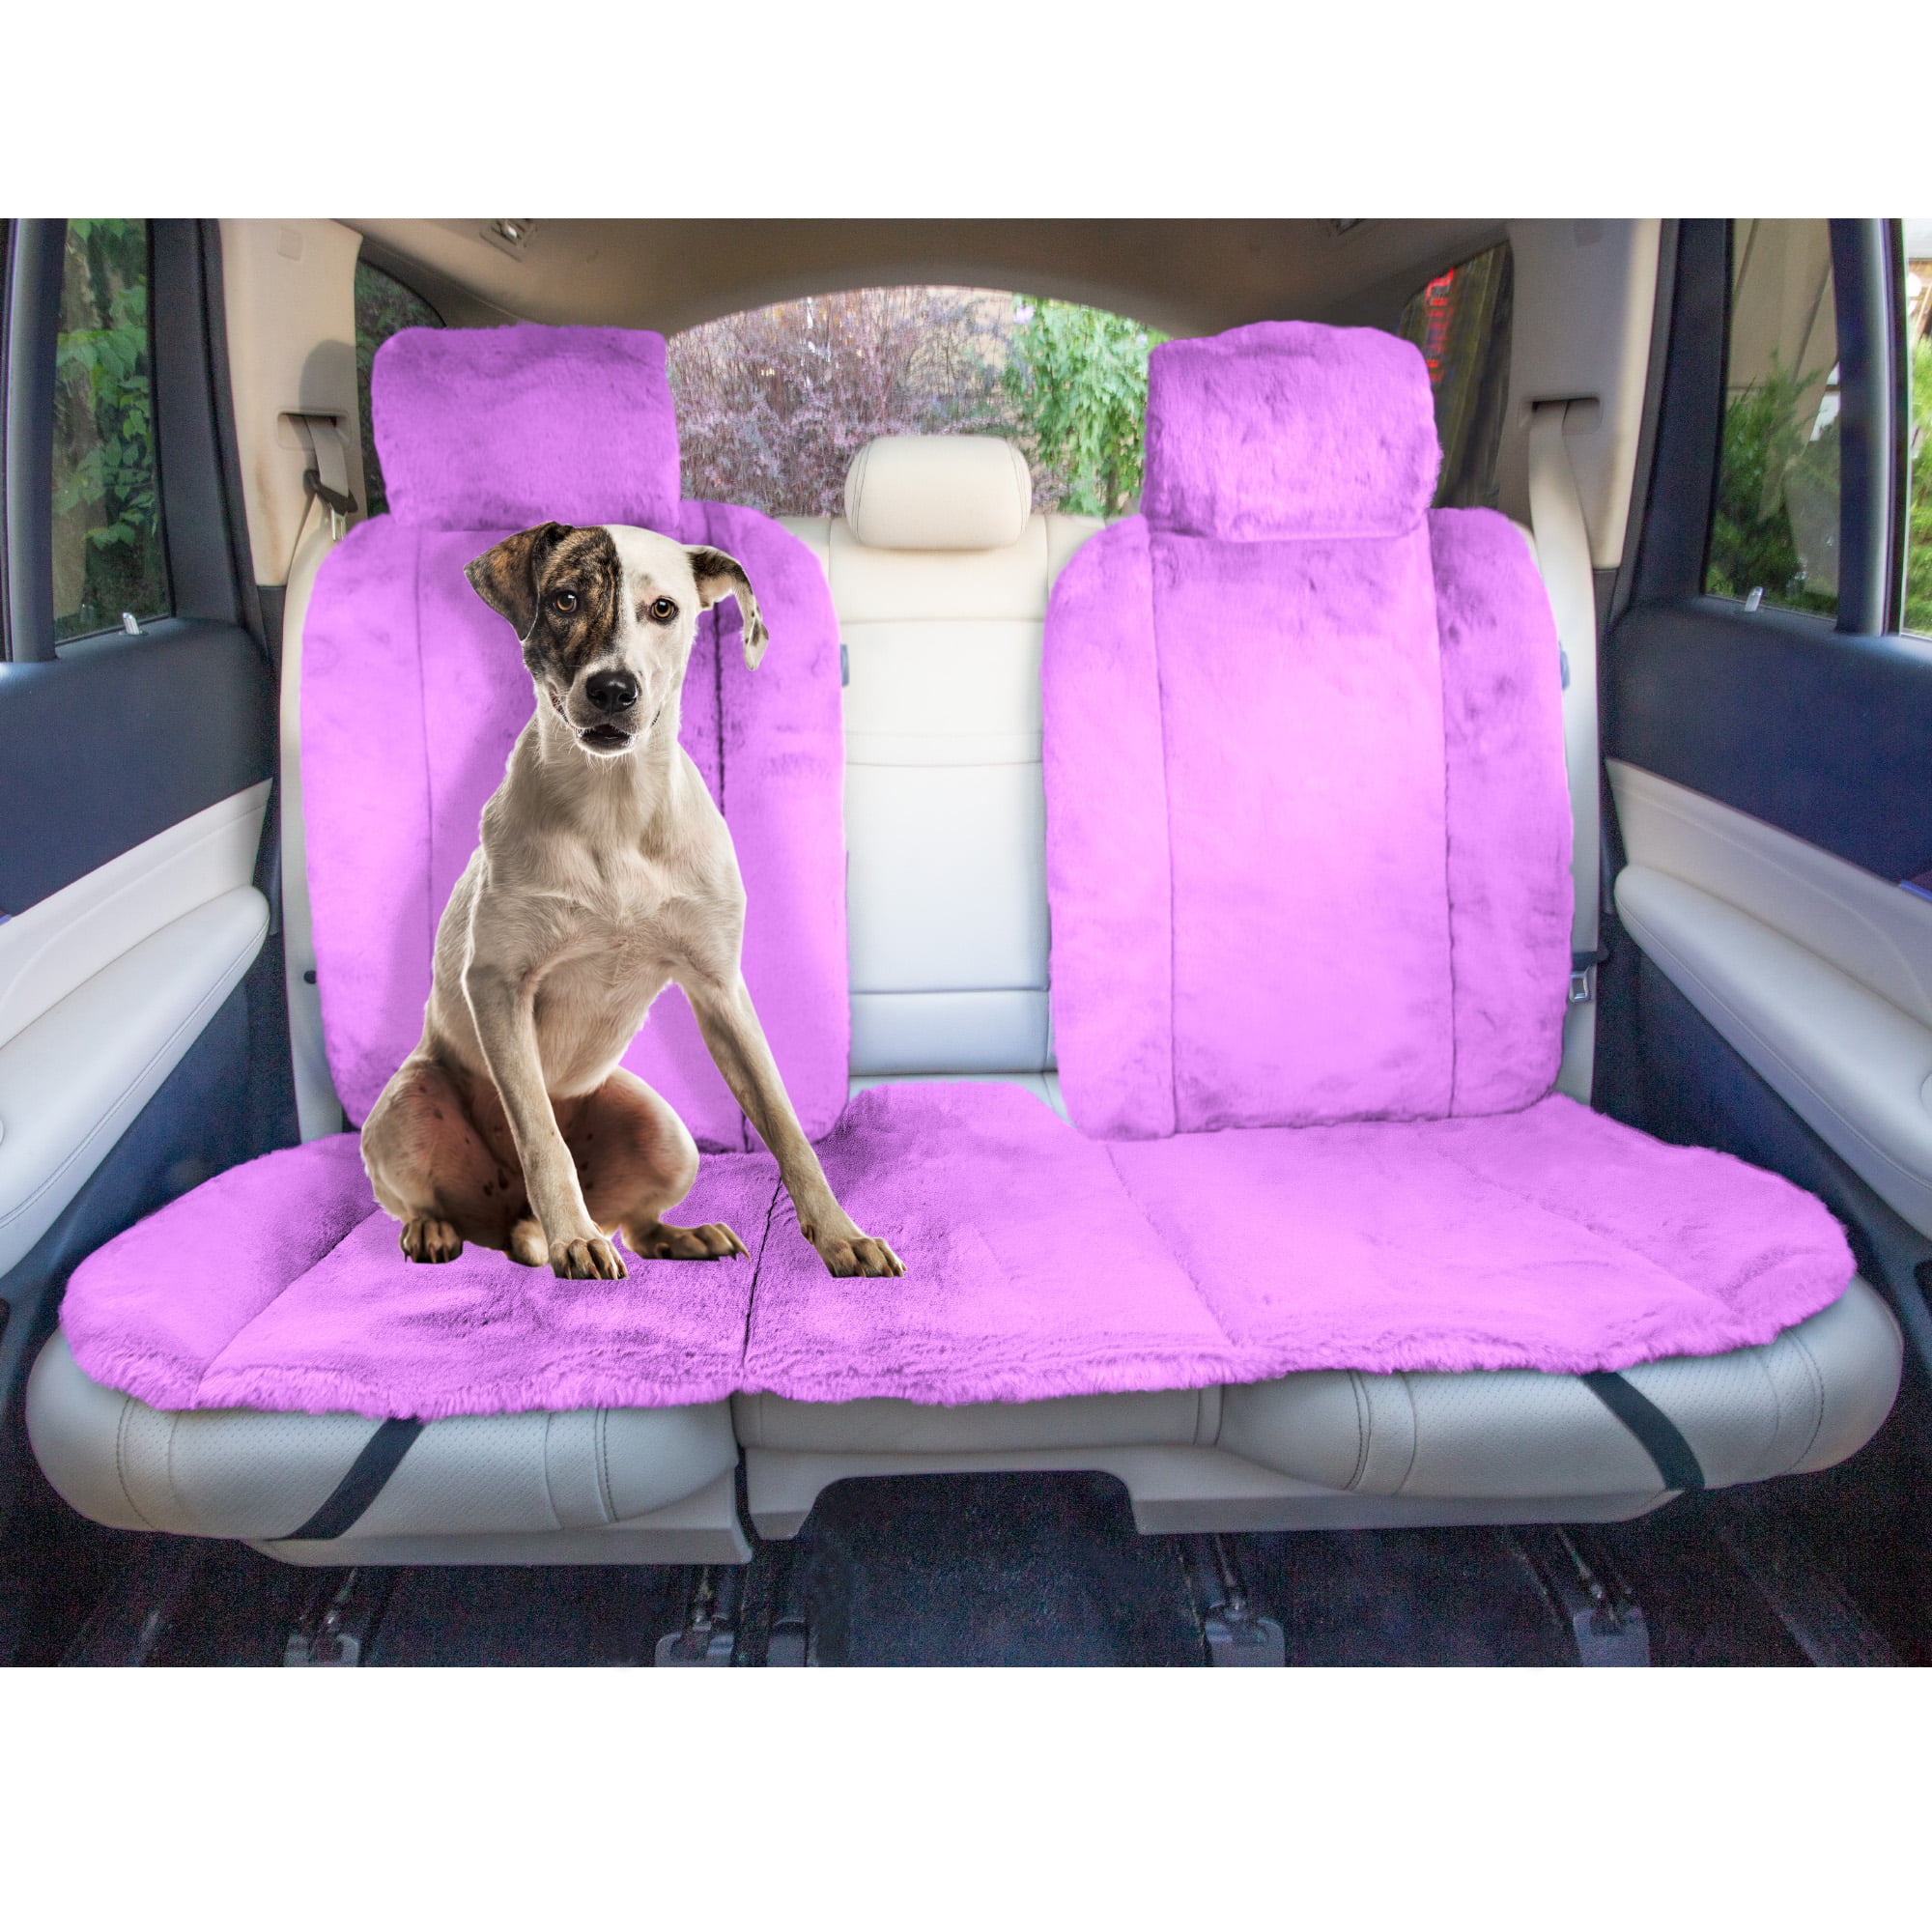 FH Group Doe16 Fluffy Faux Fur Car Seat Cushions Full Set for Most Cars, Trucks, SUVs or Vans Purple Full Set, Size: 5 Seater